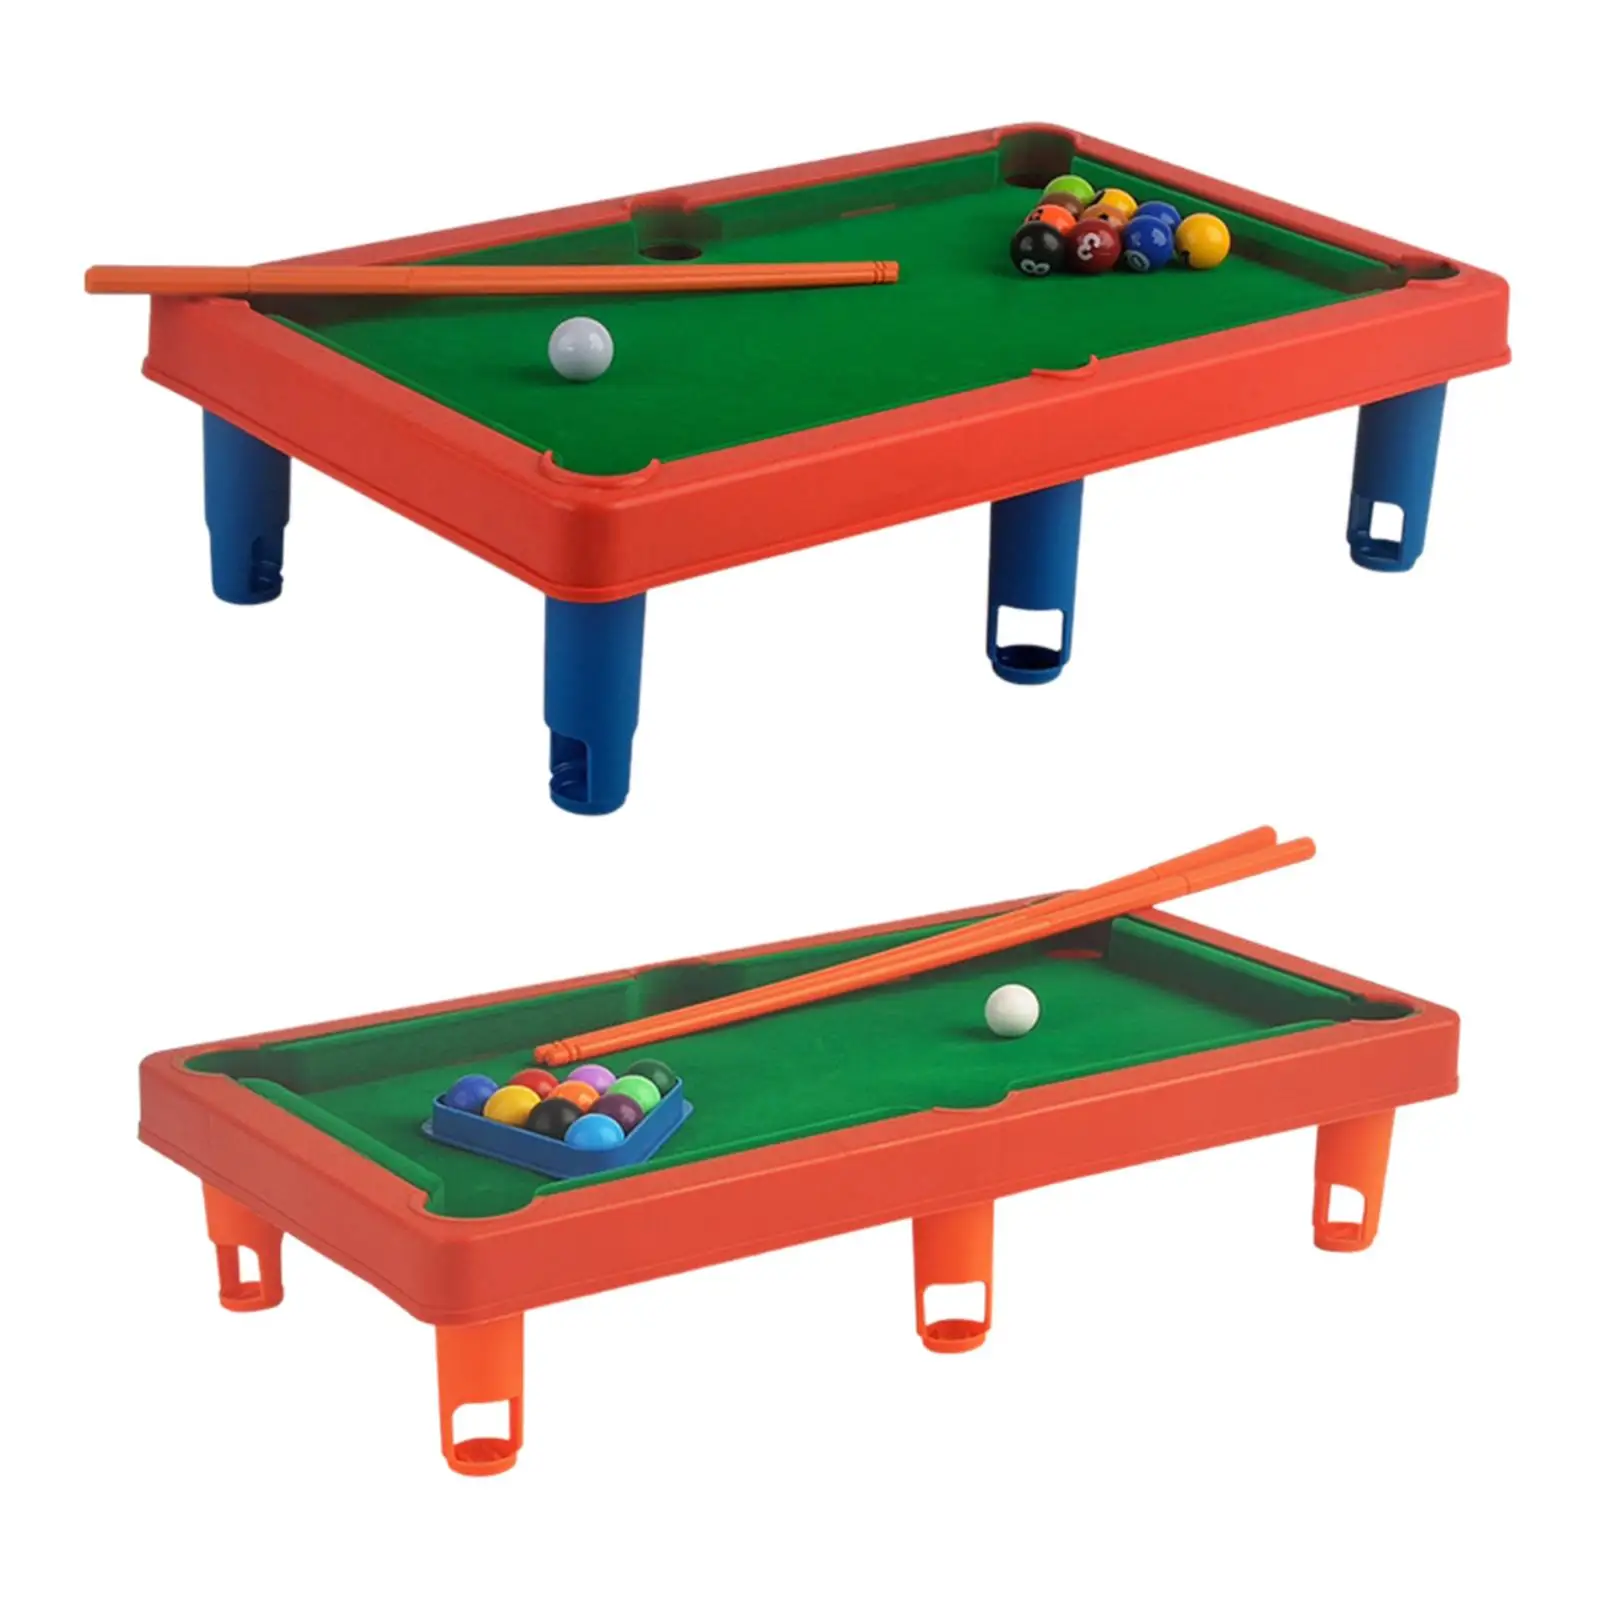 Mini Pool Table Set, Snooker Table Desktop Game Toy, Small Tabletop Billiards for Girls